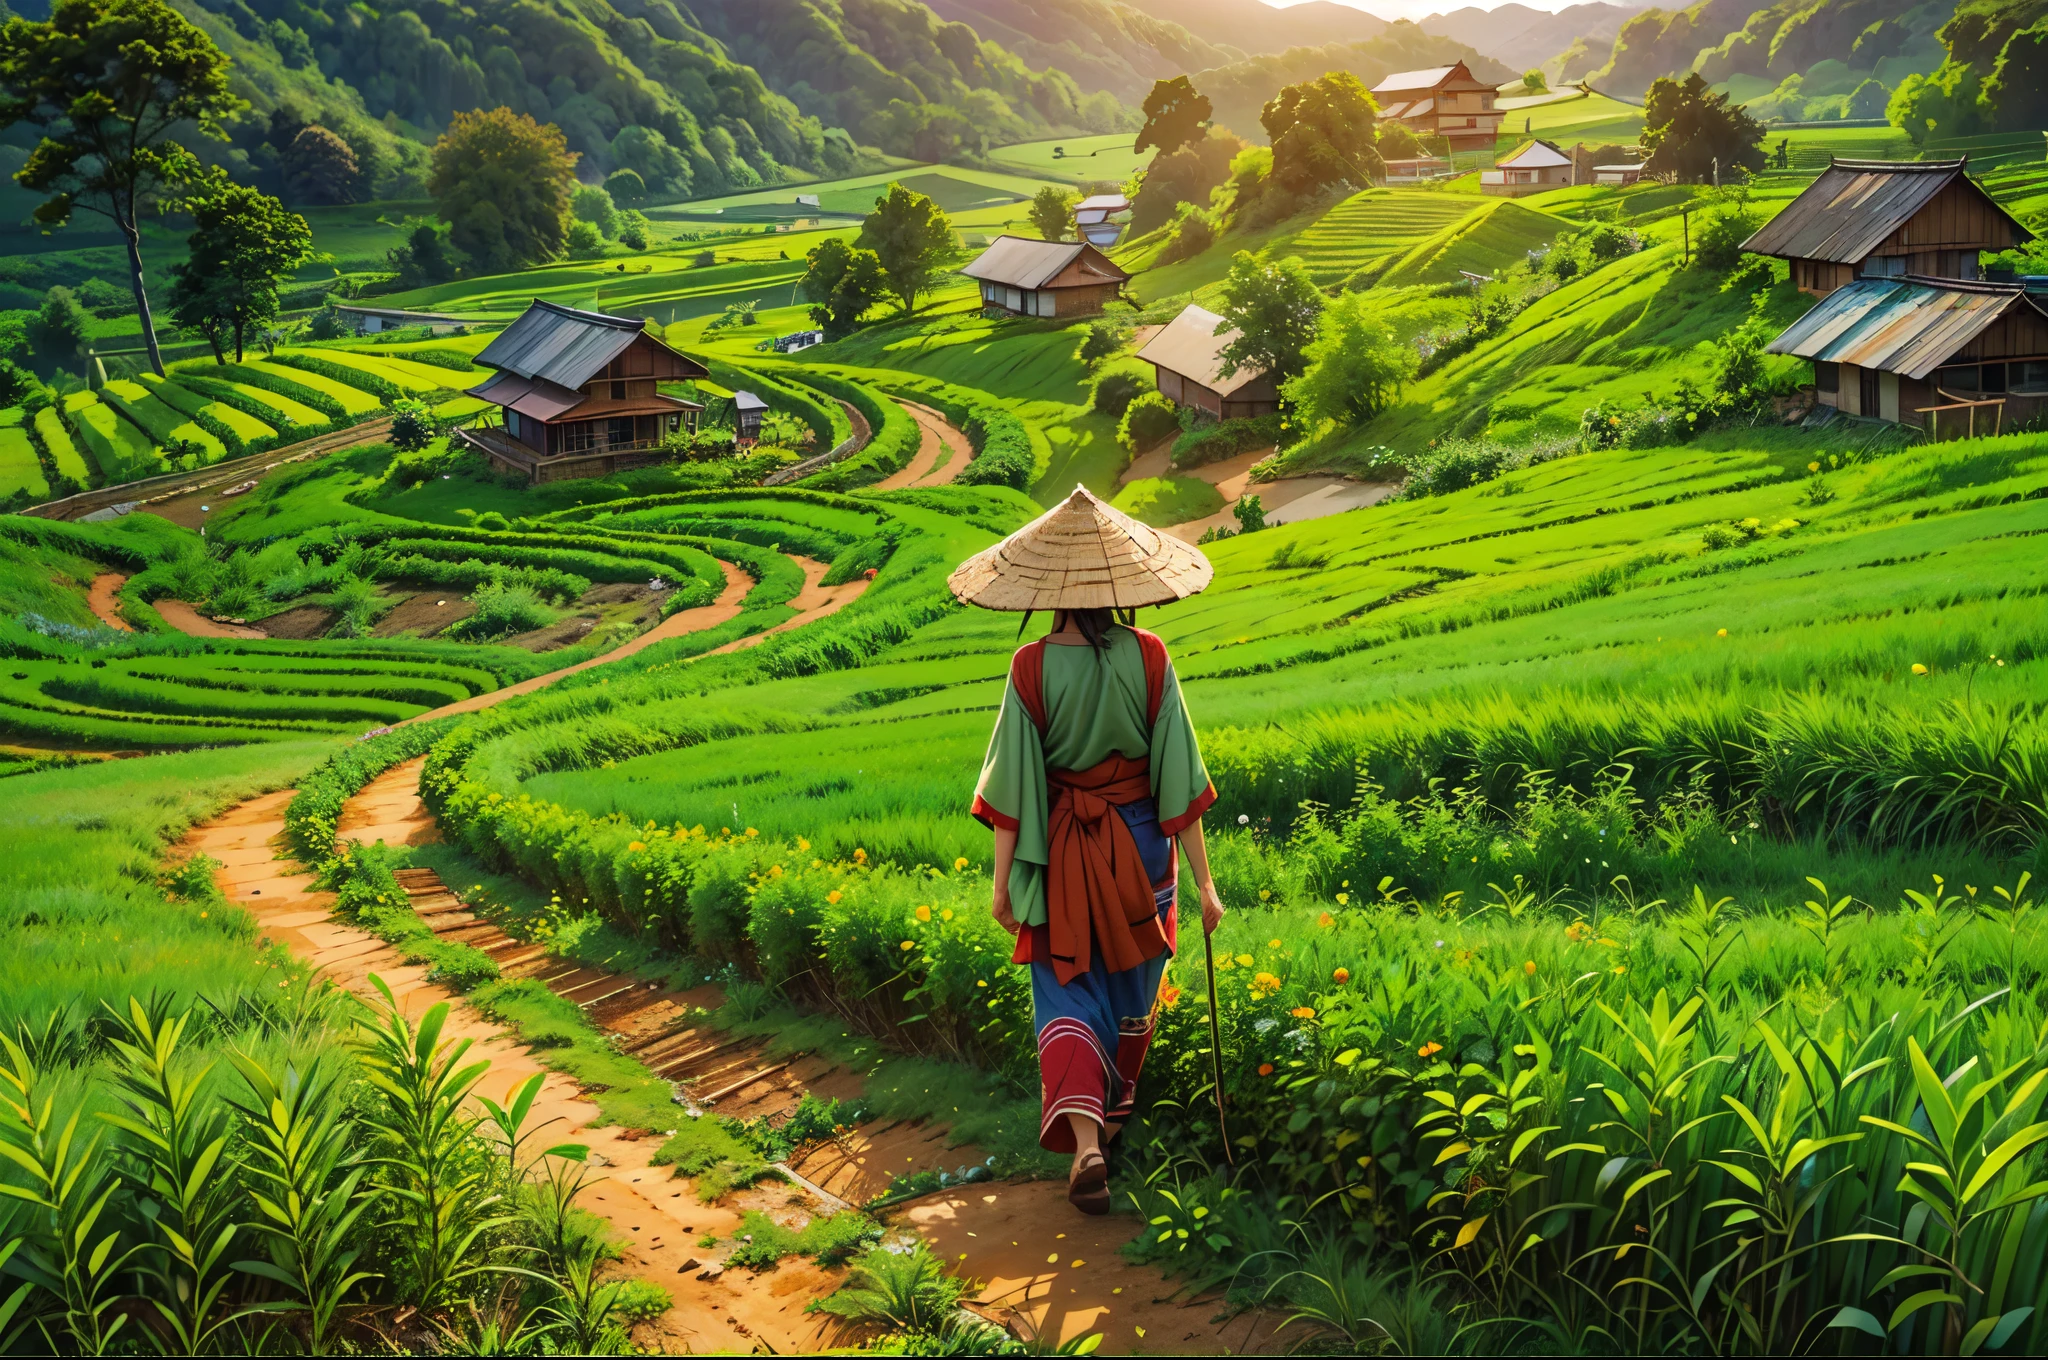 (best quality,4k,8k,highres,masterpiece:1.2),ultra-detailed,realistic,photorealistic:1.37,southeast asia,staircase field,farmer,2chickens,Vietnam,farm life,fertile land,rice terrace,traditional agriculture,harvest season,greenery,peaceful landscape,hardworking,traditional clothing,errand in the farm,sturdy bamboo hat,serene atmosphere,family-owned farm,vibrant culture,colorful traditional houses,rich heritage,breathtaking view,lush vegetation,abundant rice crops,modern farming techniques,sunshine through the leaves,buffalo grazing,community spirit,daily farm chores,simple living,sustainable farming practices,farm-to-table,fresh organic produce,farmhouse,authentic experience,tranquil countryside